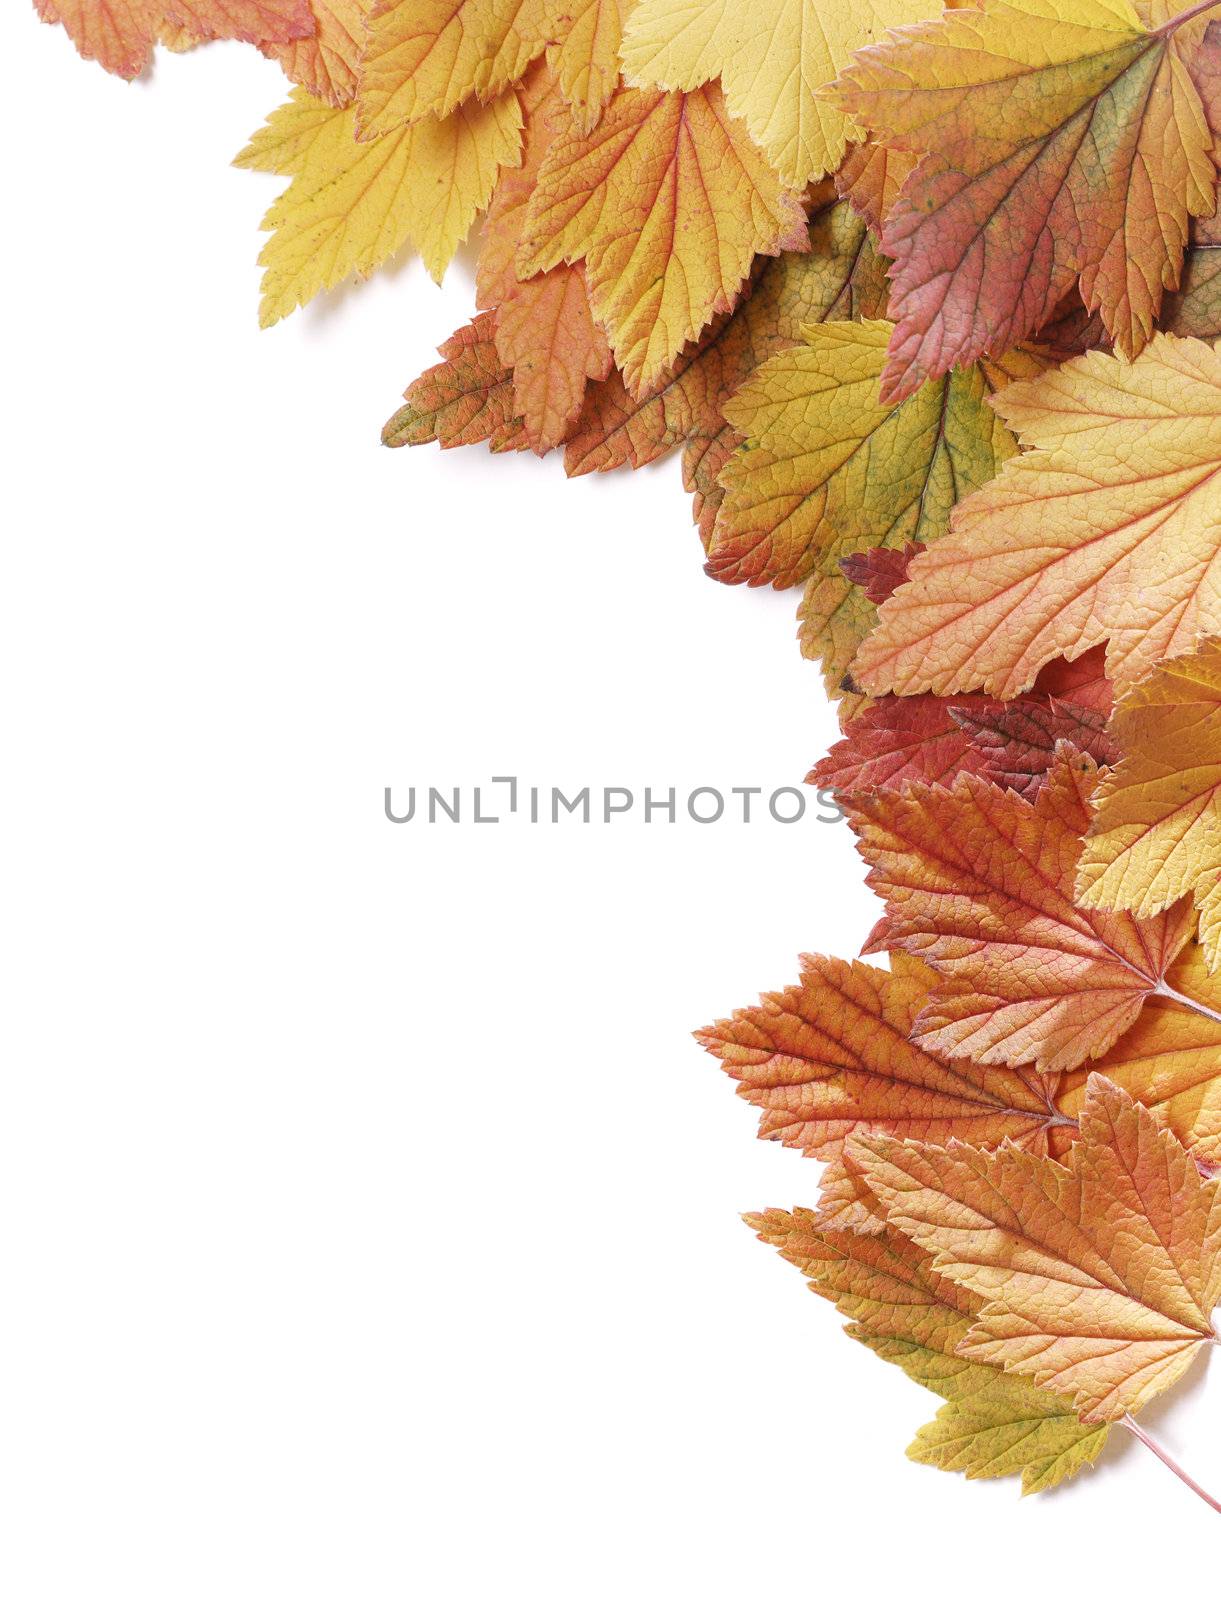 Autumn leaves by Stocksnapper